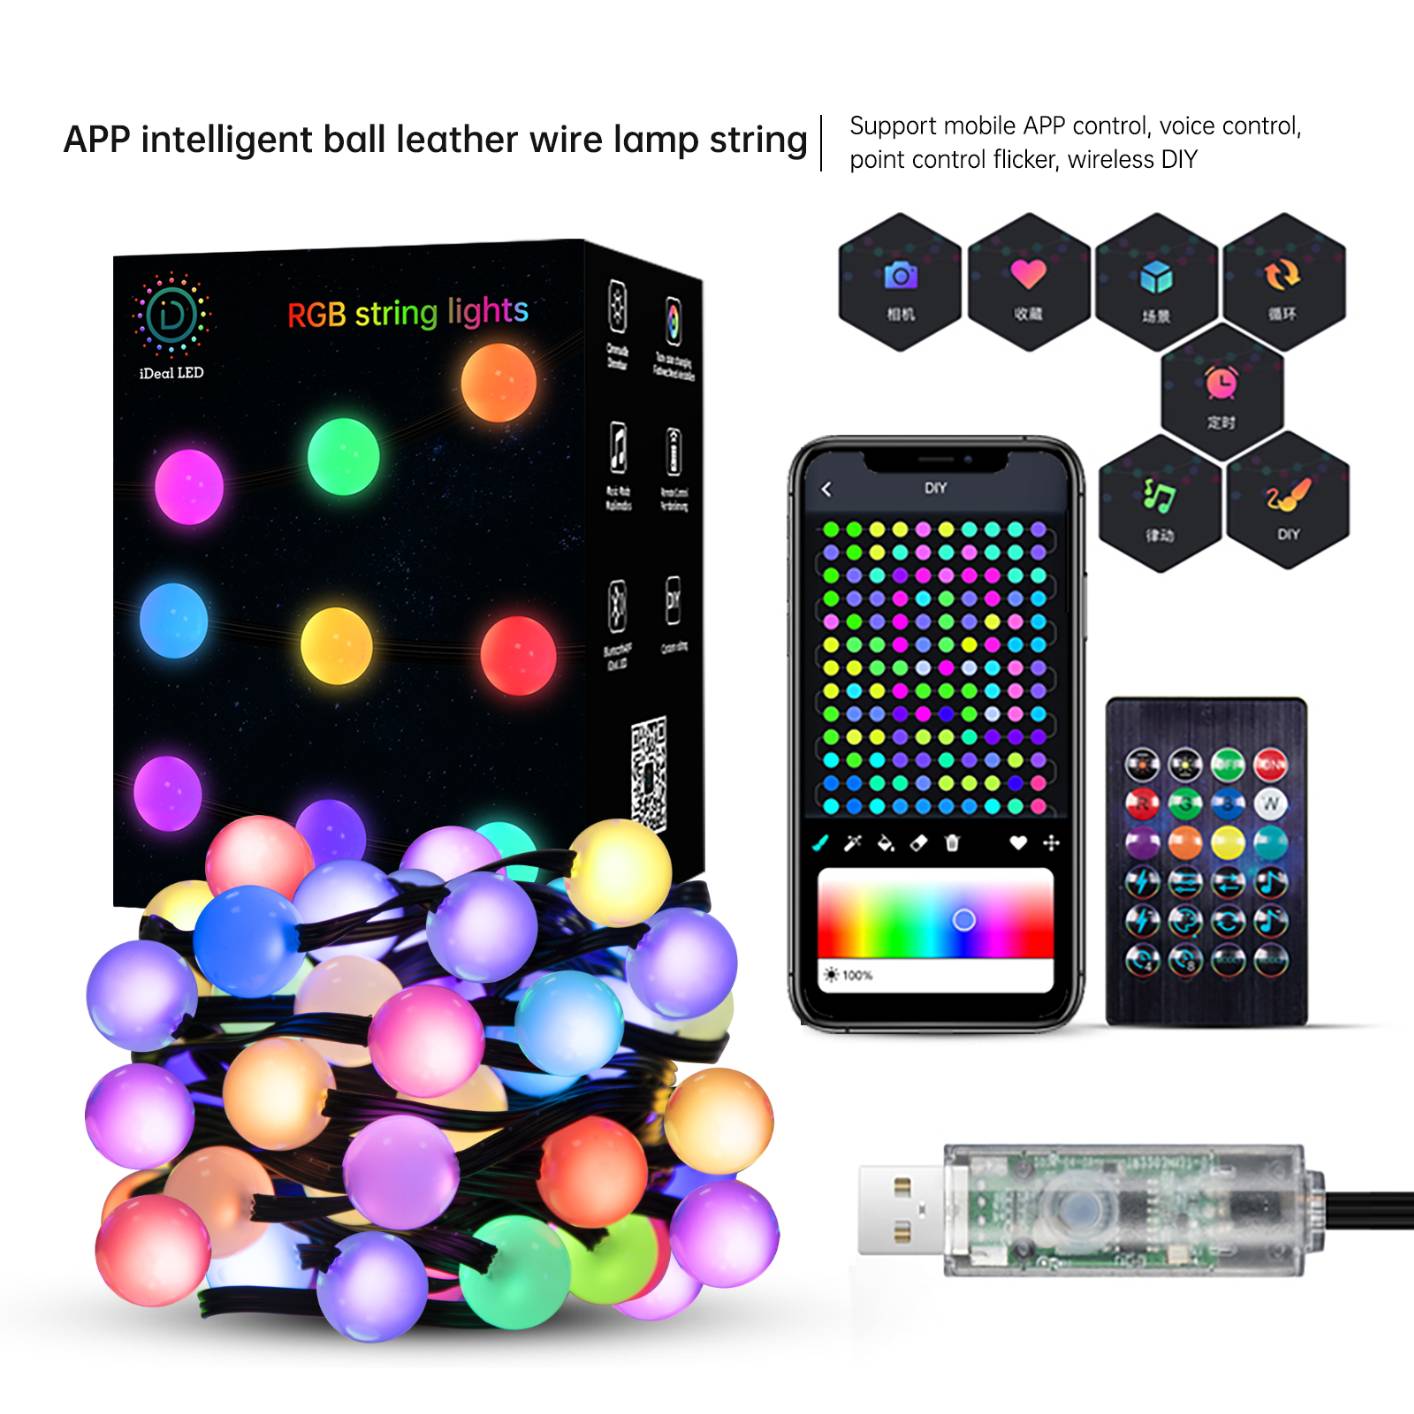 AUNONT APP intelligent point control integrated round ball magic light string small white ball leather string garden Christmas decorative lights